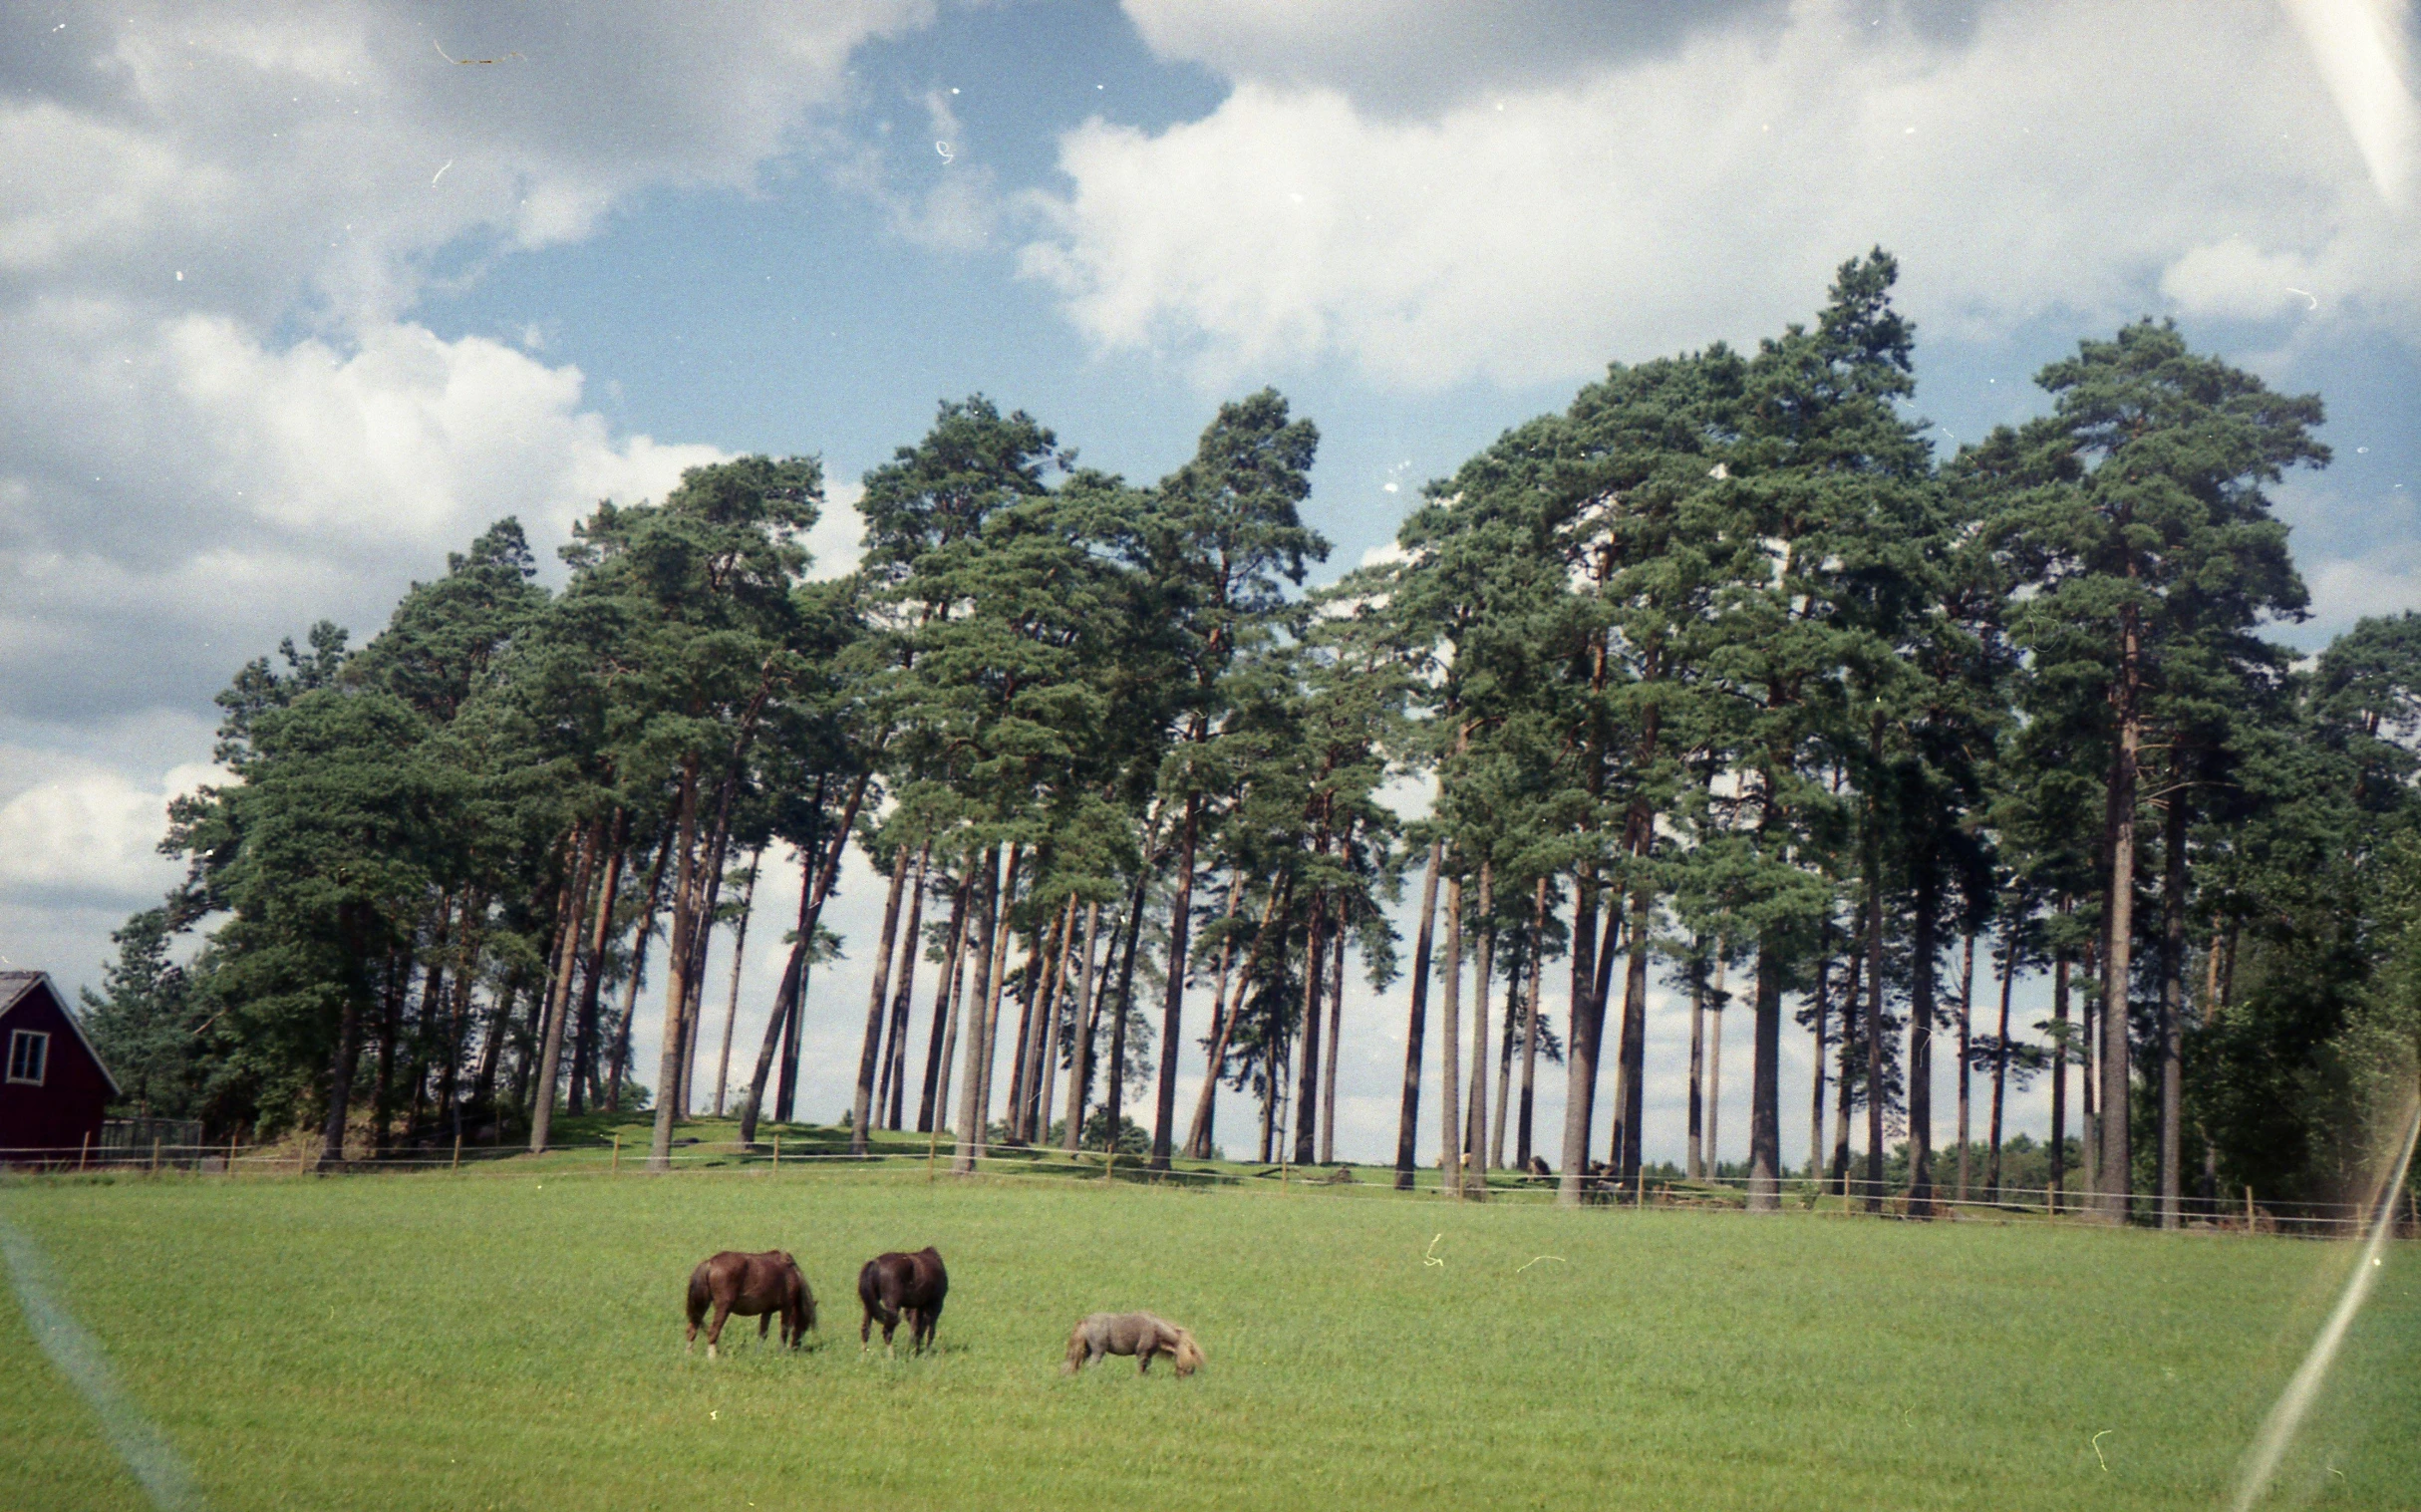 a herd of horses grazing on a lush green field, by Charles Uzzell-Edwards, unsplash, land art, tall pine trees, 3 5 mm slide, 1990s photograph, farming